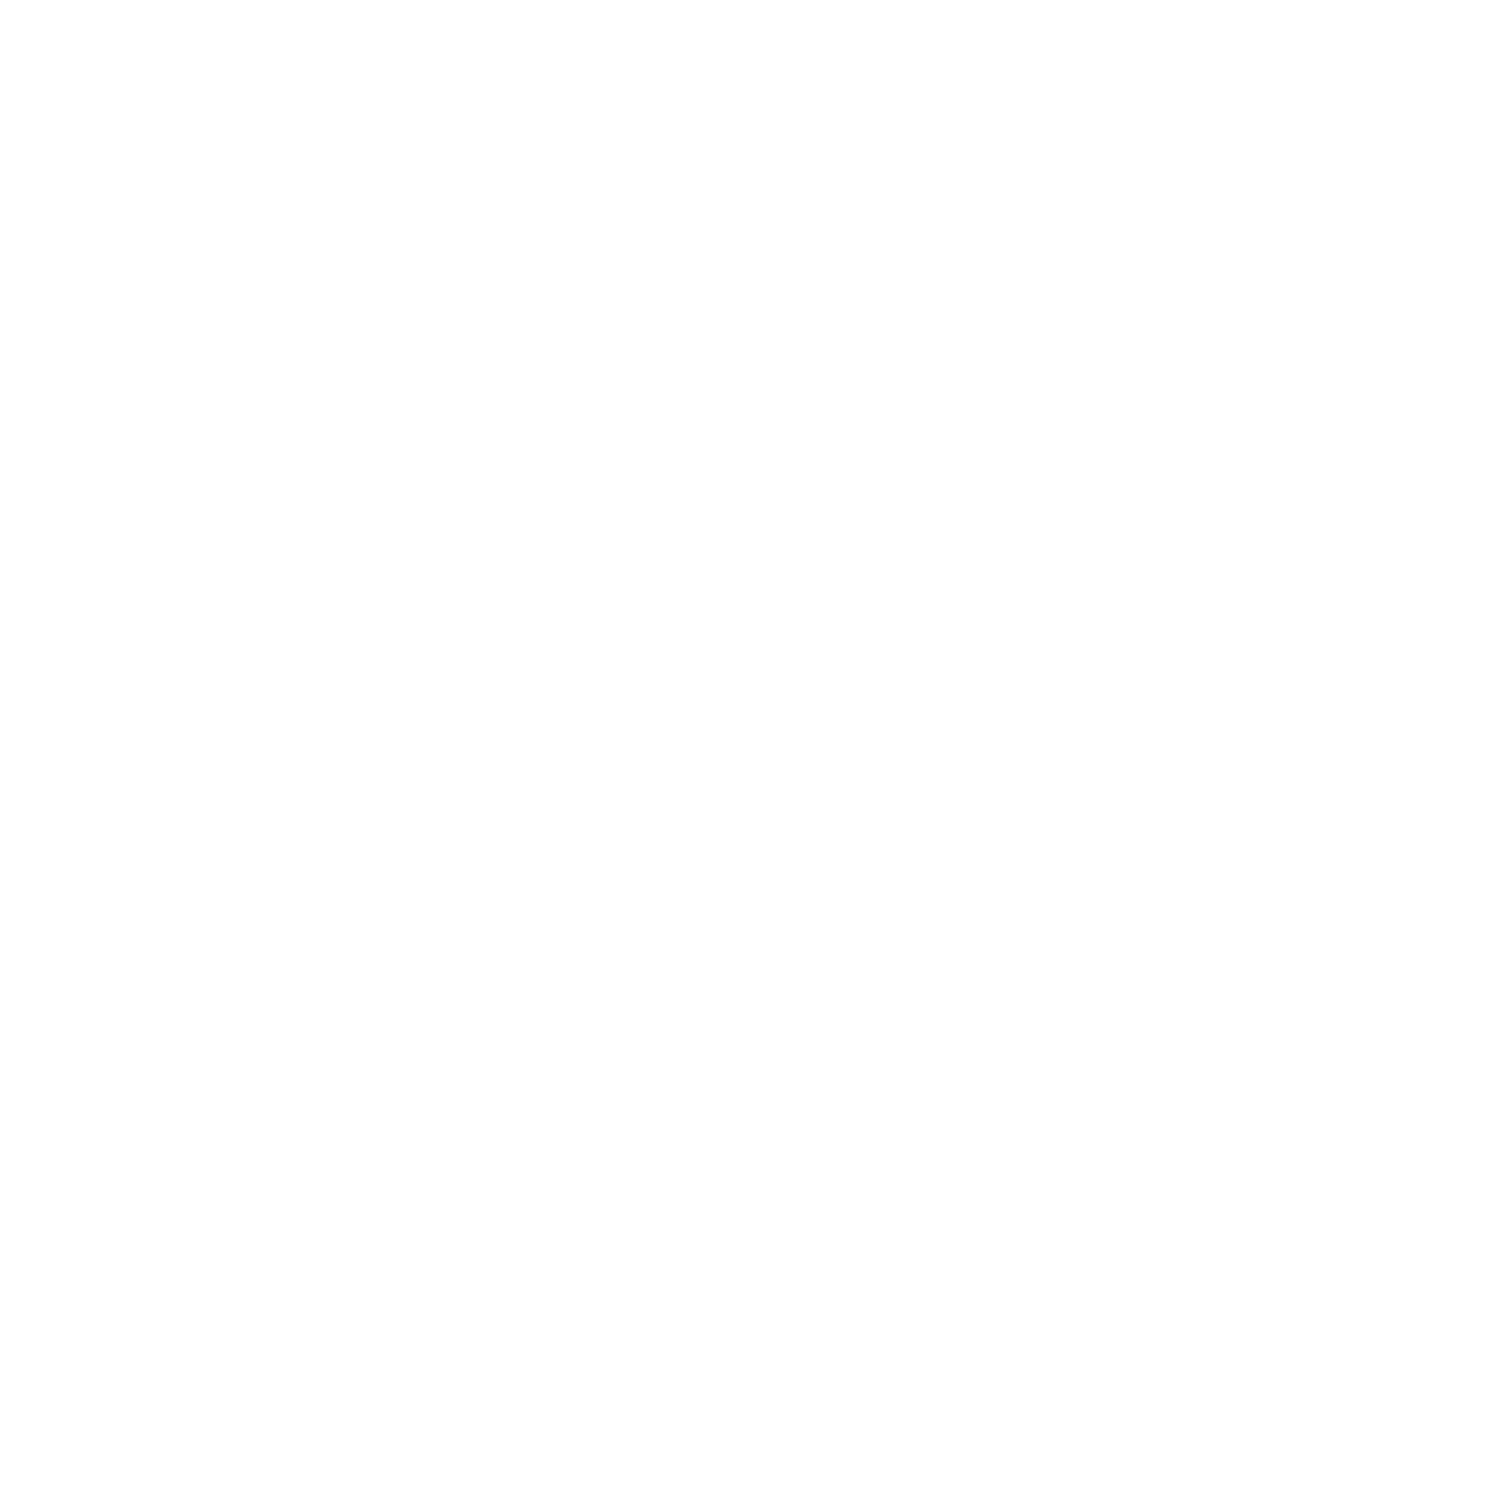 Montana Election Integrity Project